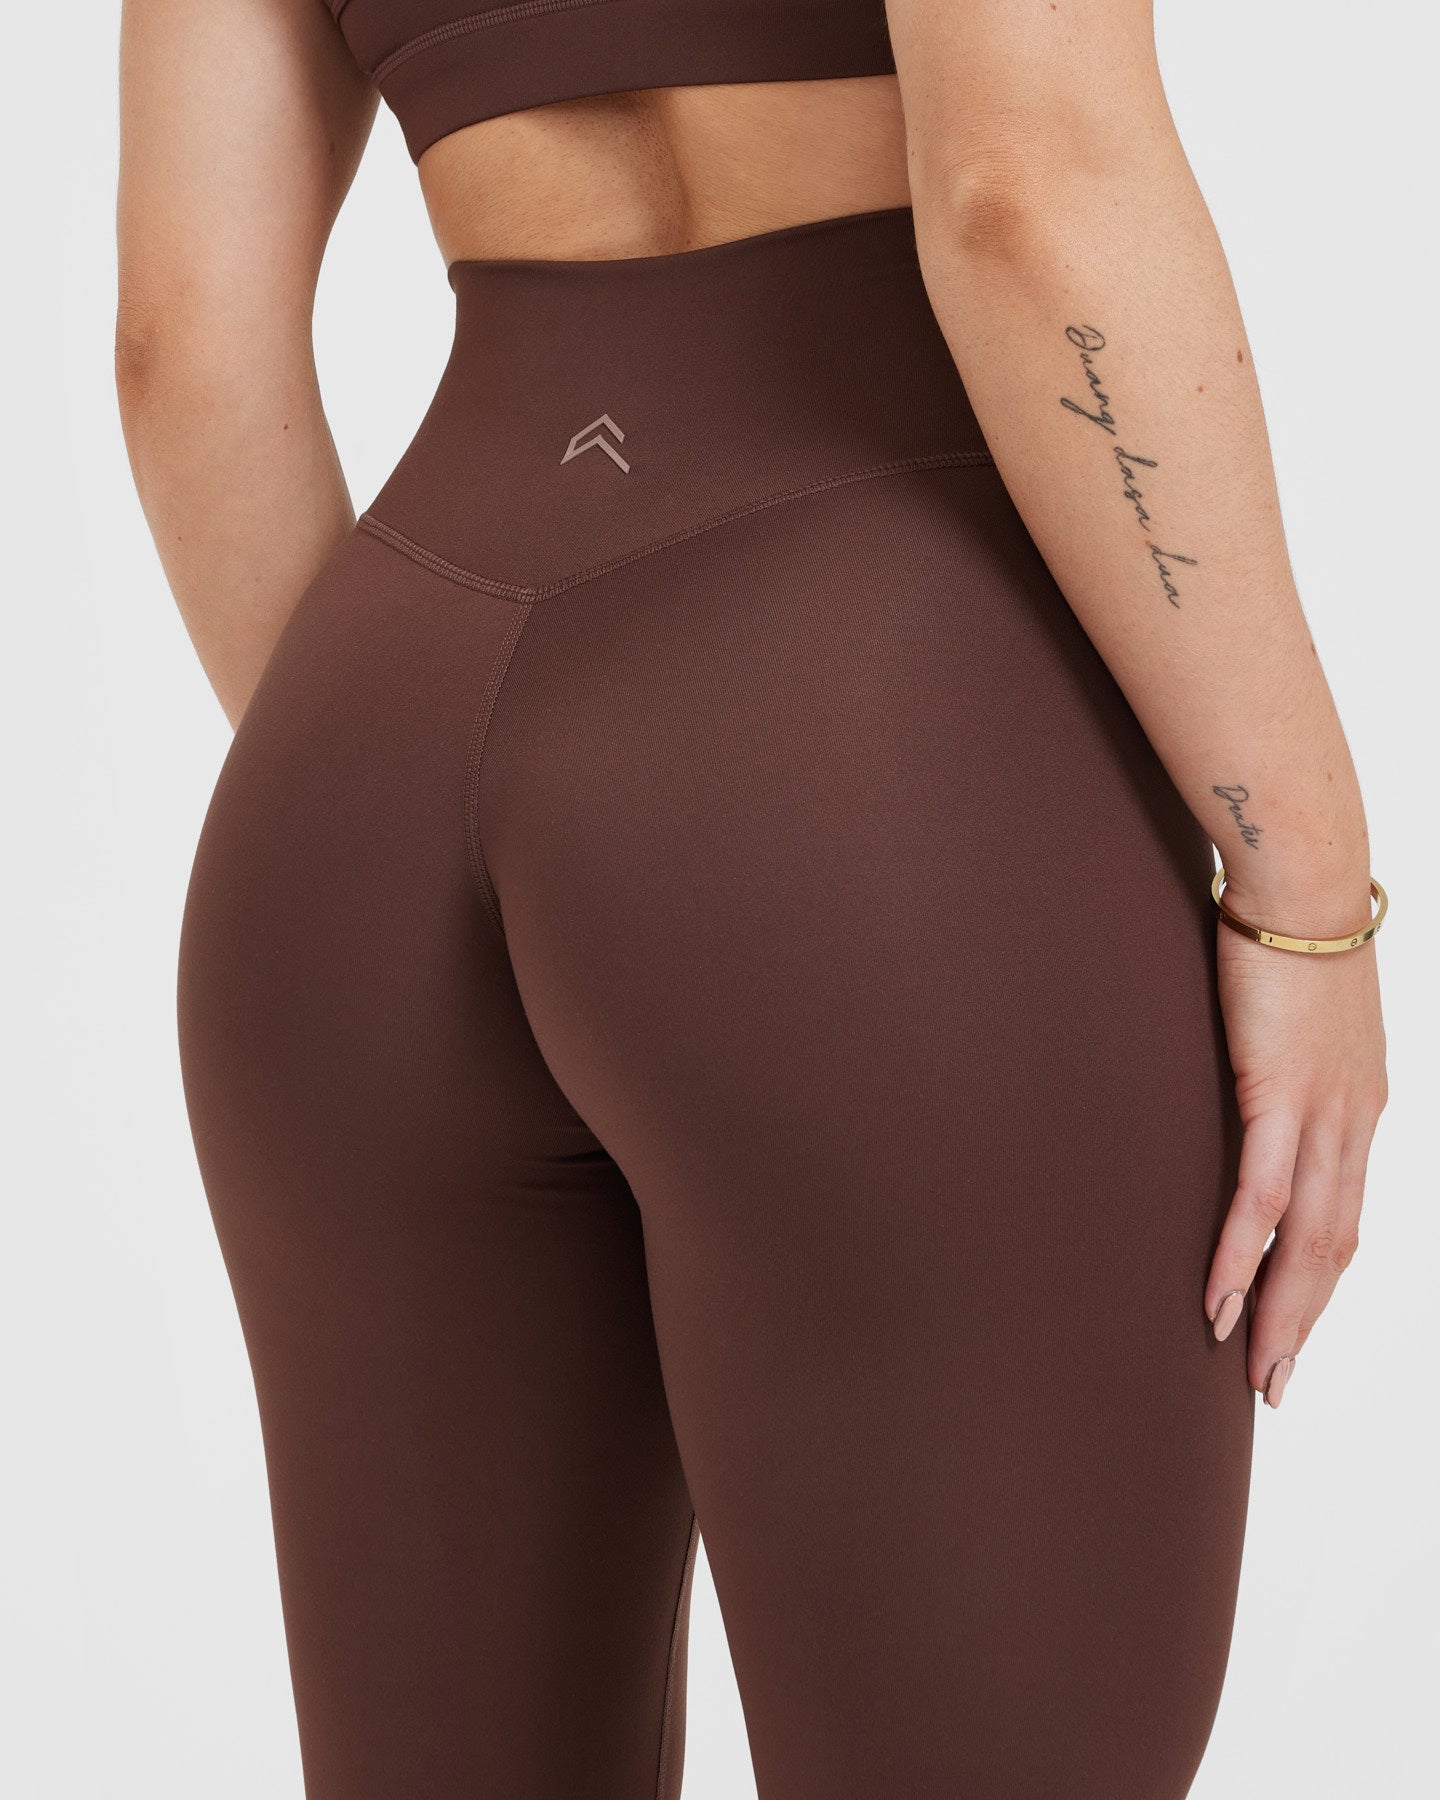 Buy Chocolate Brown Cropped Leggings from the Next UK online shop